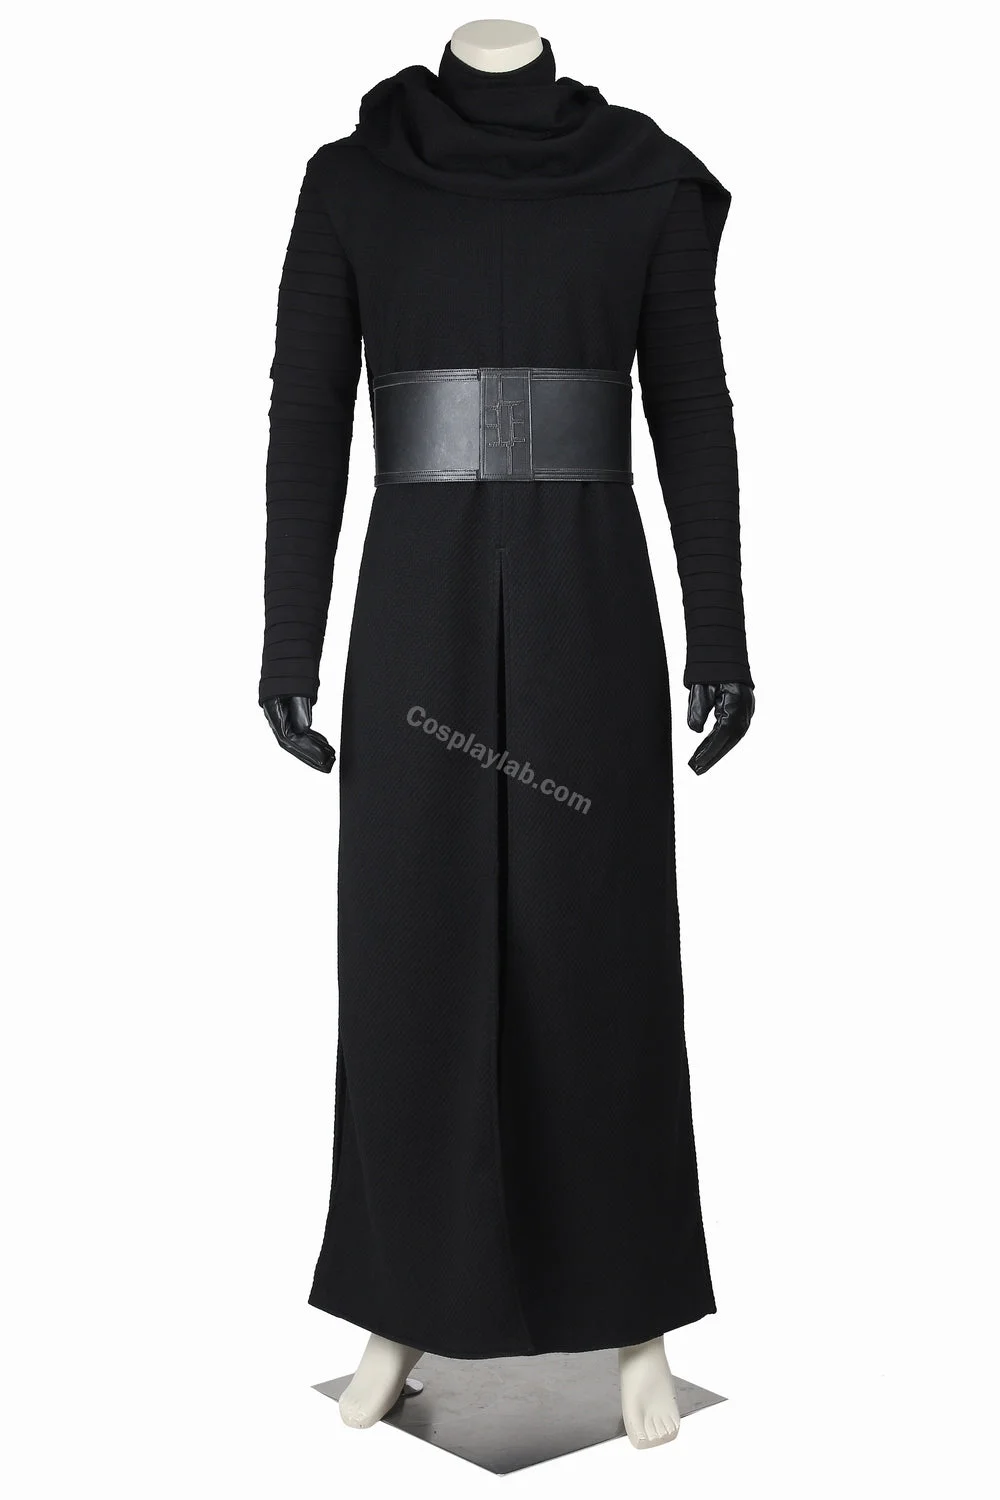 Kylo Ren Costume The Force Awakens Classic Cosplay Suits By CosplayLab